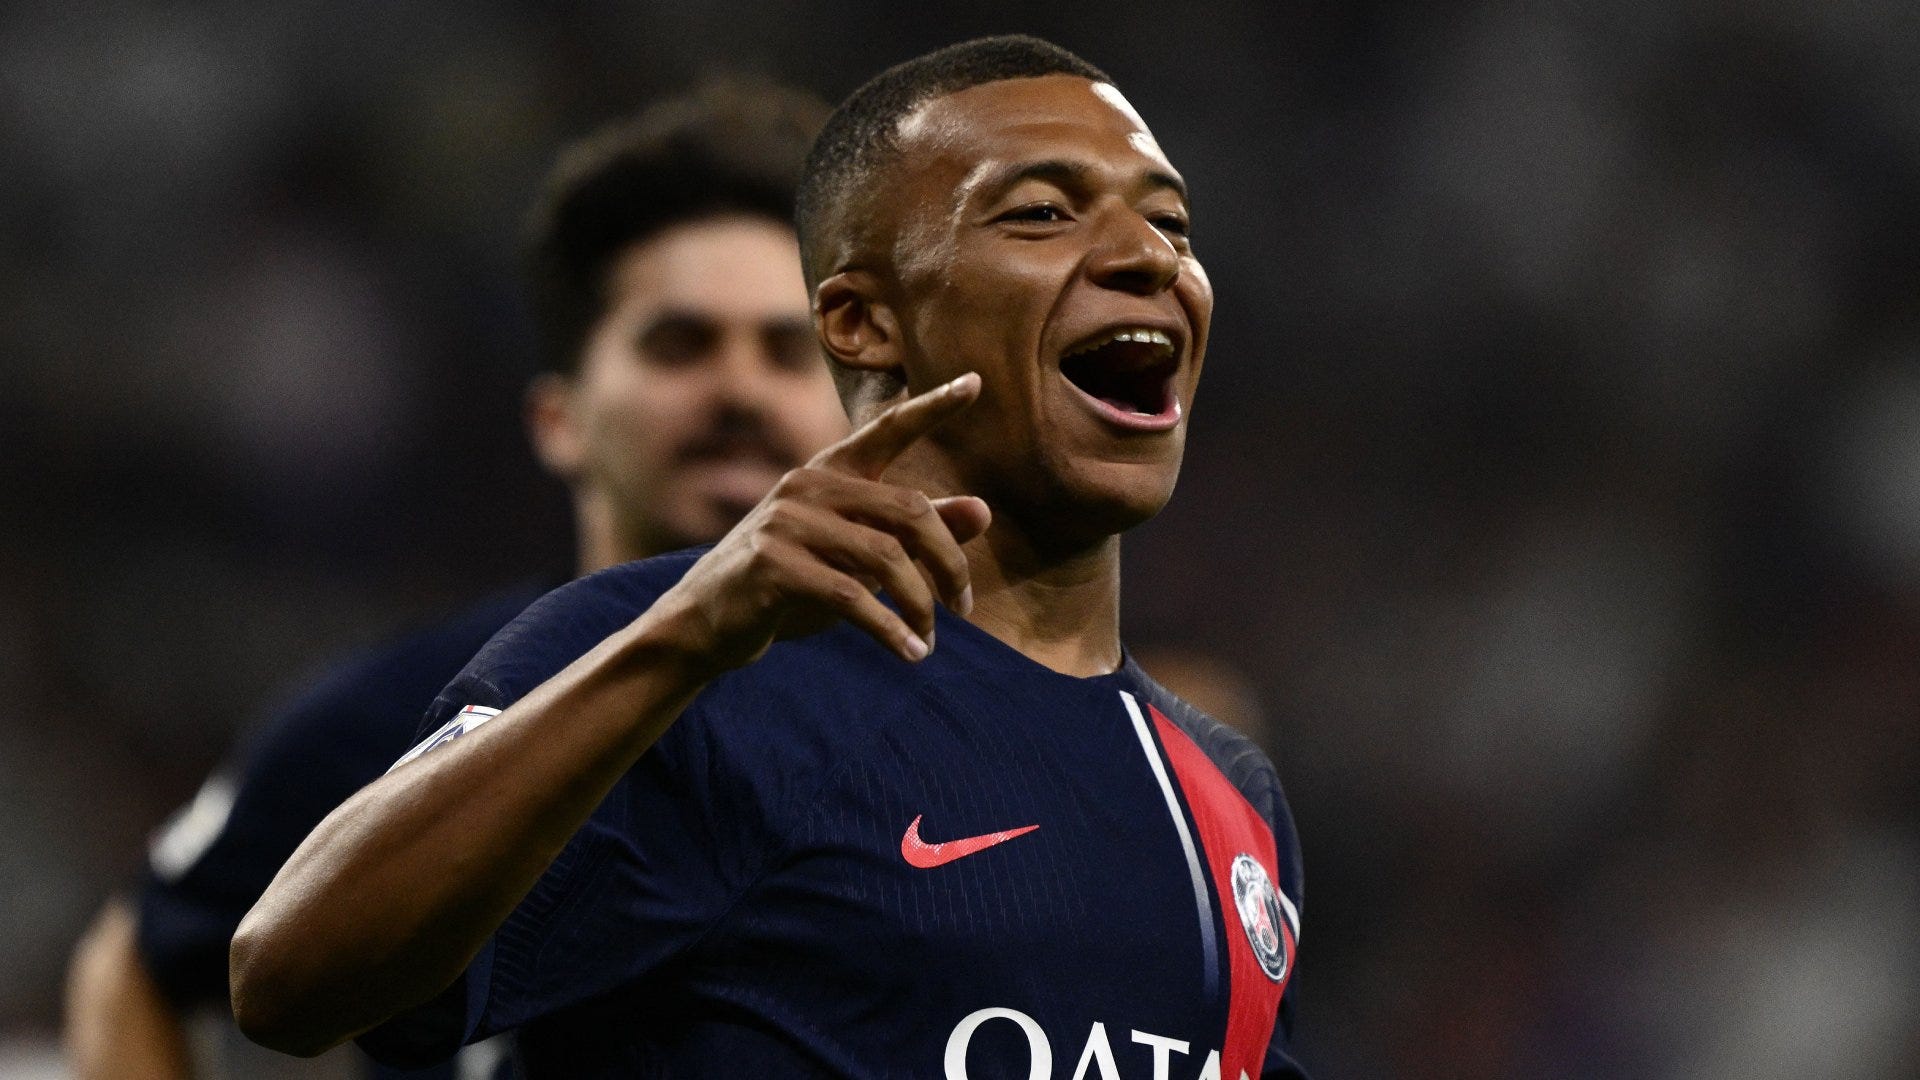 PSG vs Nice Live stream, TV channel, kick-off time and where to watch Goal US